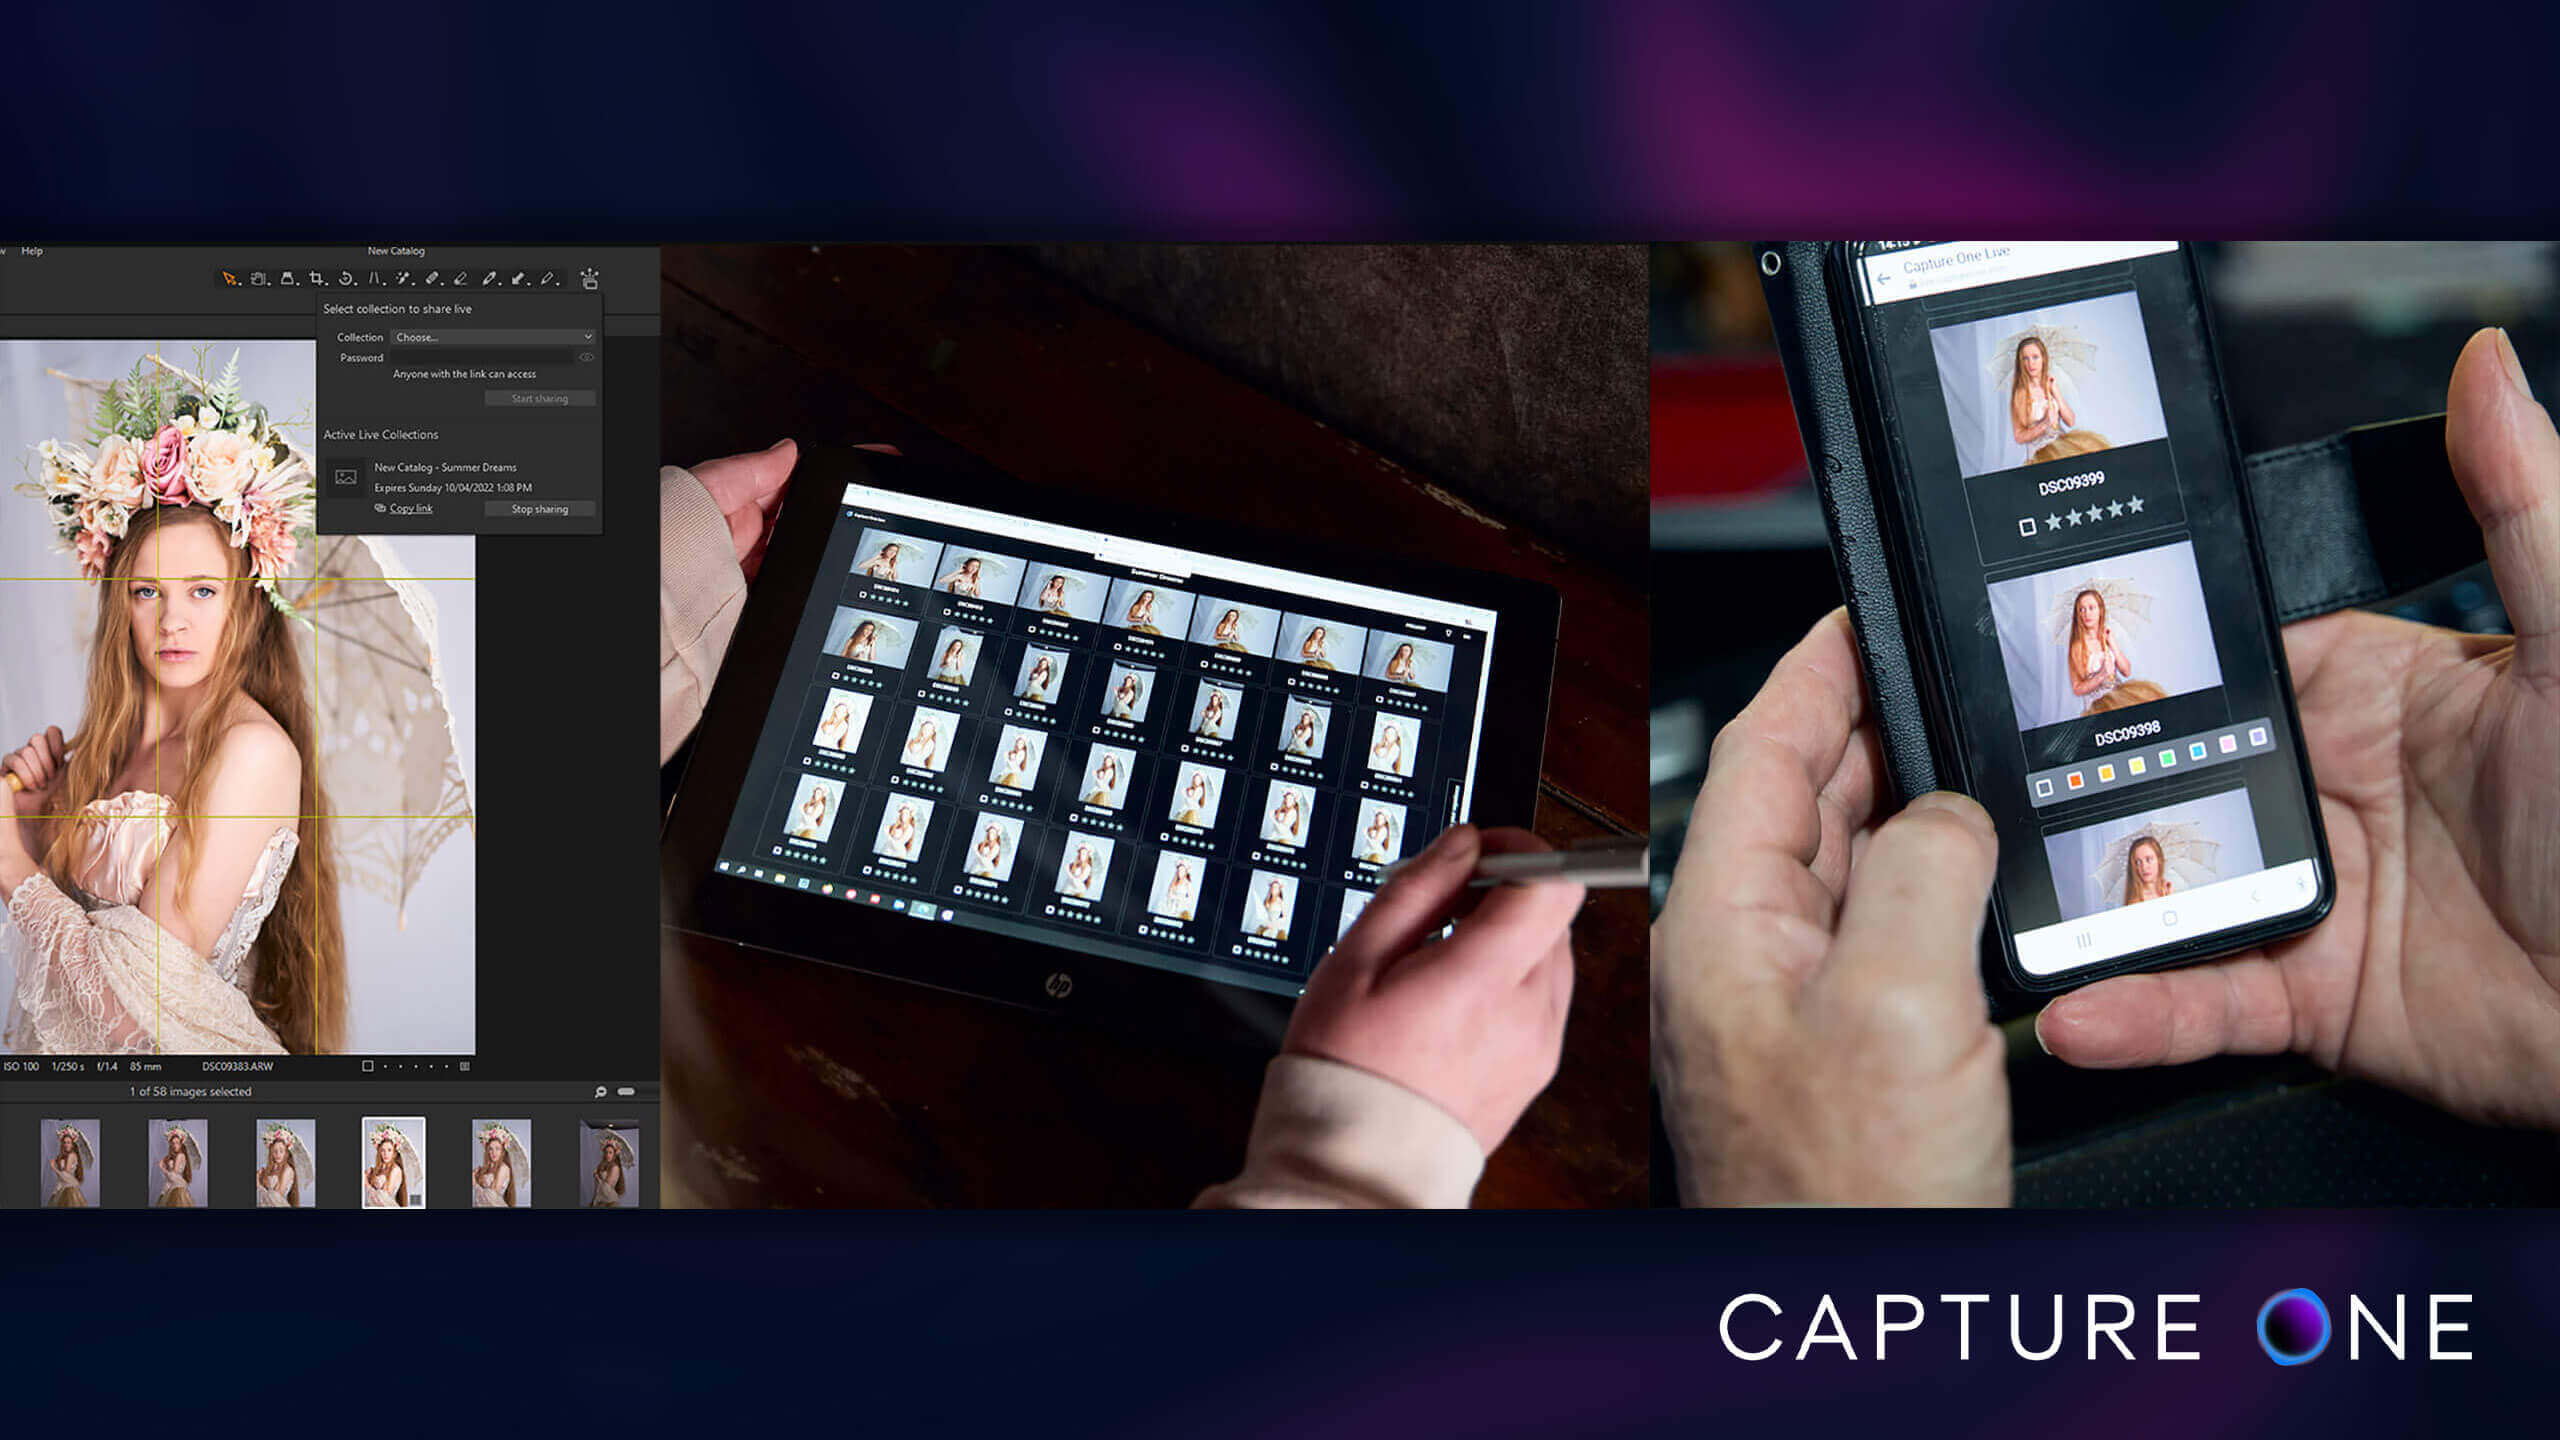  interface of capture one